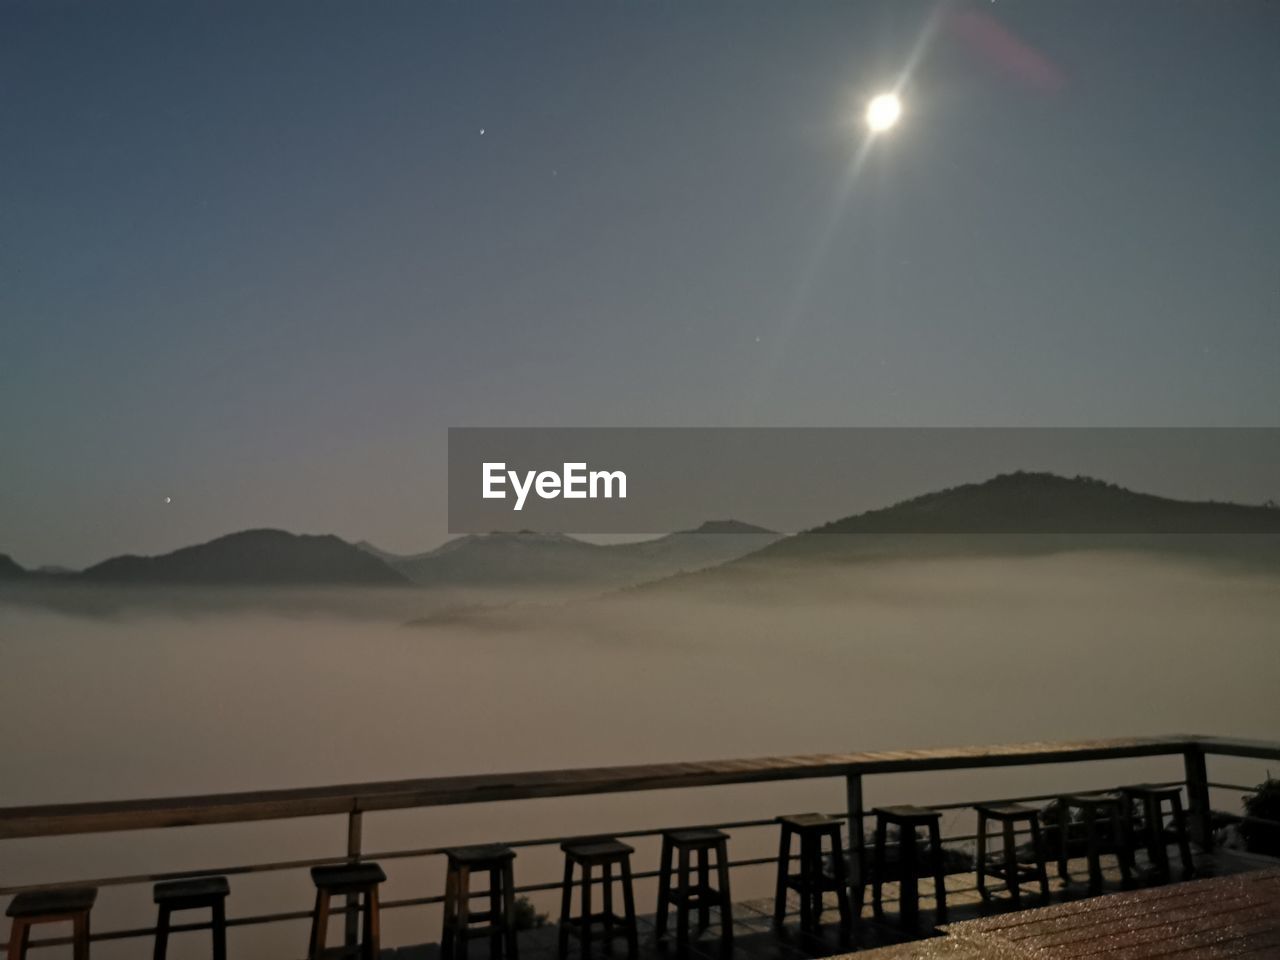 sky, water, mountain, scenics - nature, moon, horizon, nature, beauty in nature, dawn, morning, railing, tranquility, night, tranquil scene, lake, mountain range, astronomical object, pier, no people, environment, architecture, outdoors, bridge, landscape, silhouette, full moon, travel destinations, land, moonlight, astronomy, idyllic, travel, built structure, fog, beach, wood, star